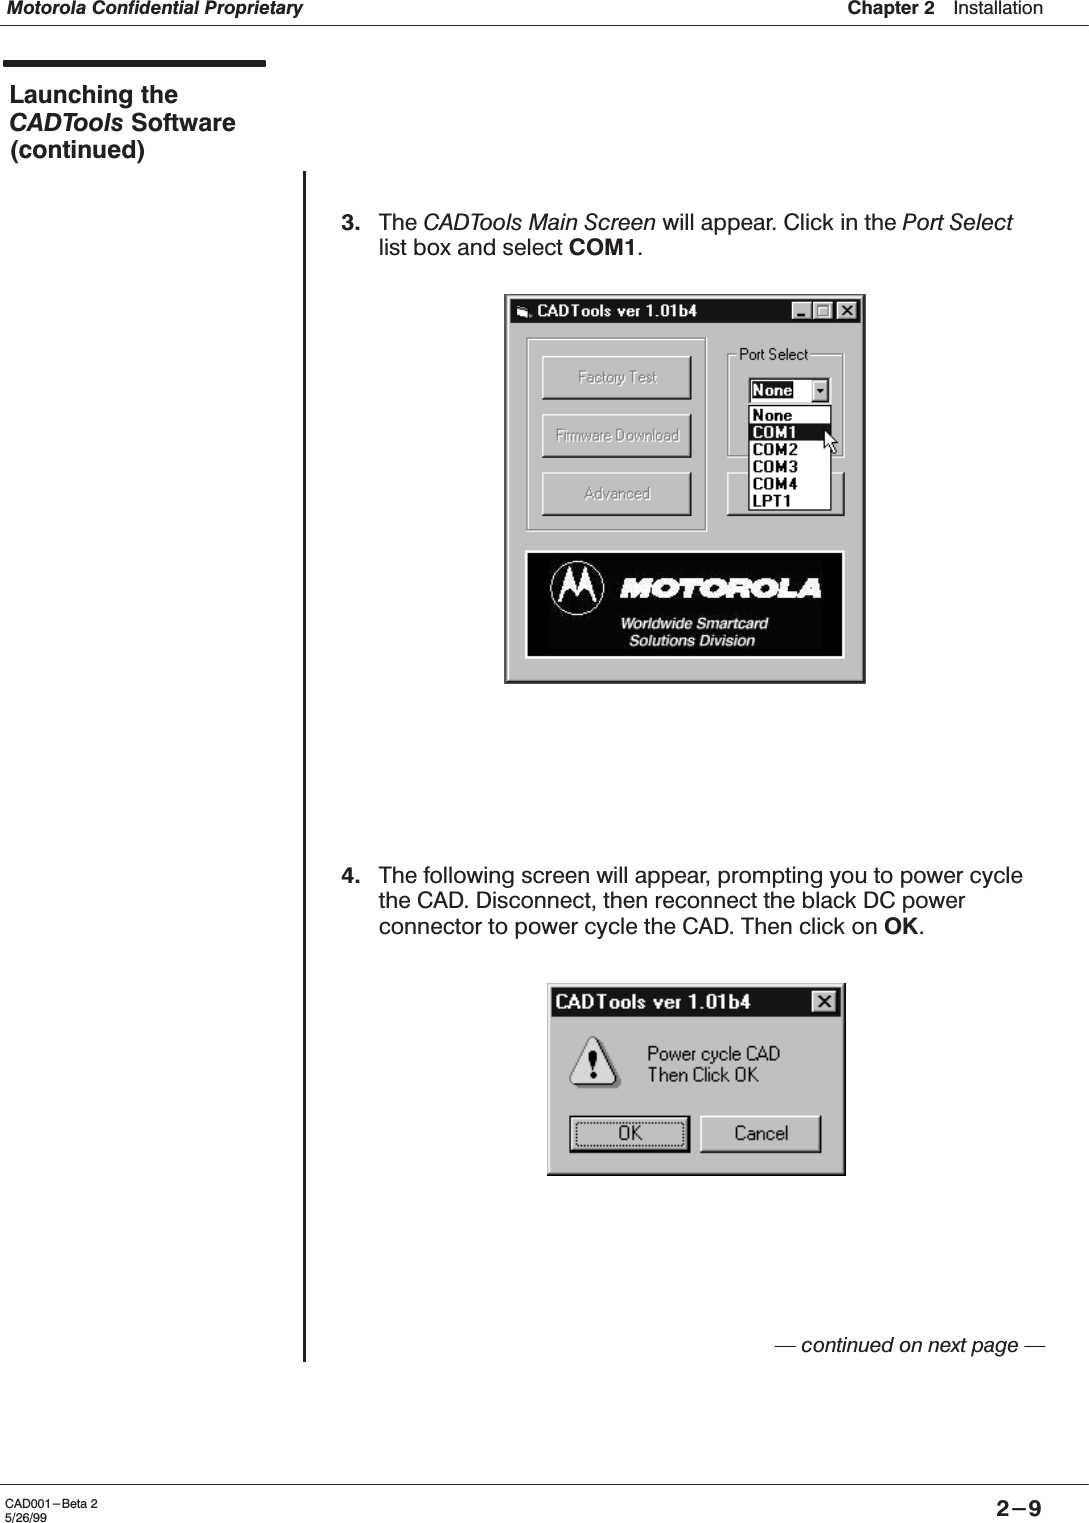 Chapter 2ąInstallationMotorola Confidential Proprietary2-9CAD001-Beta 25/26/99Launching theCADTools Software(continued)3. The CADTools Main Screen will appear. Click in the Port Selectlist box and select COM1.4. The following screen will appear, prompting you to power cyclethe CAD. Disconnect, then reconnect the black DC powerconnector to power cycle the CAD. Then click on OK.Ċ continued on next page Ċ